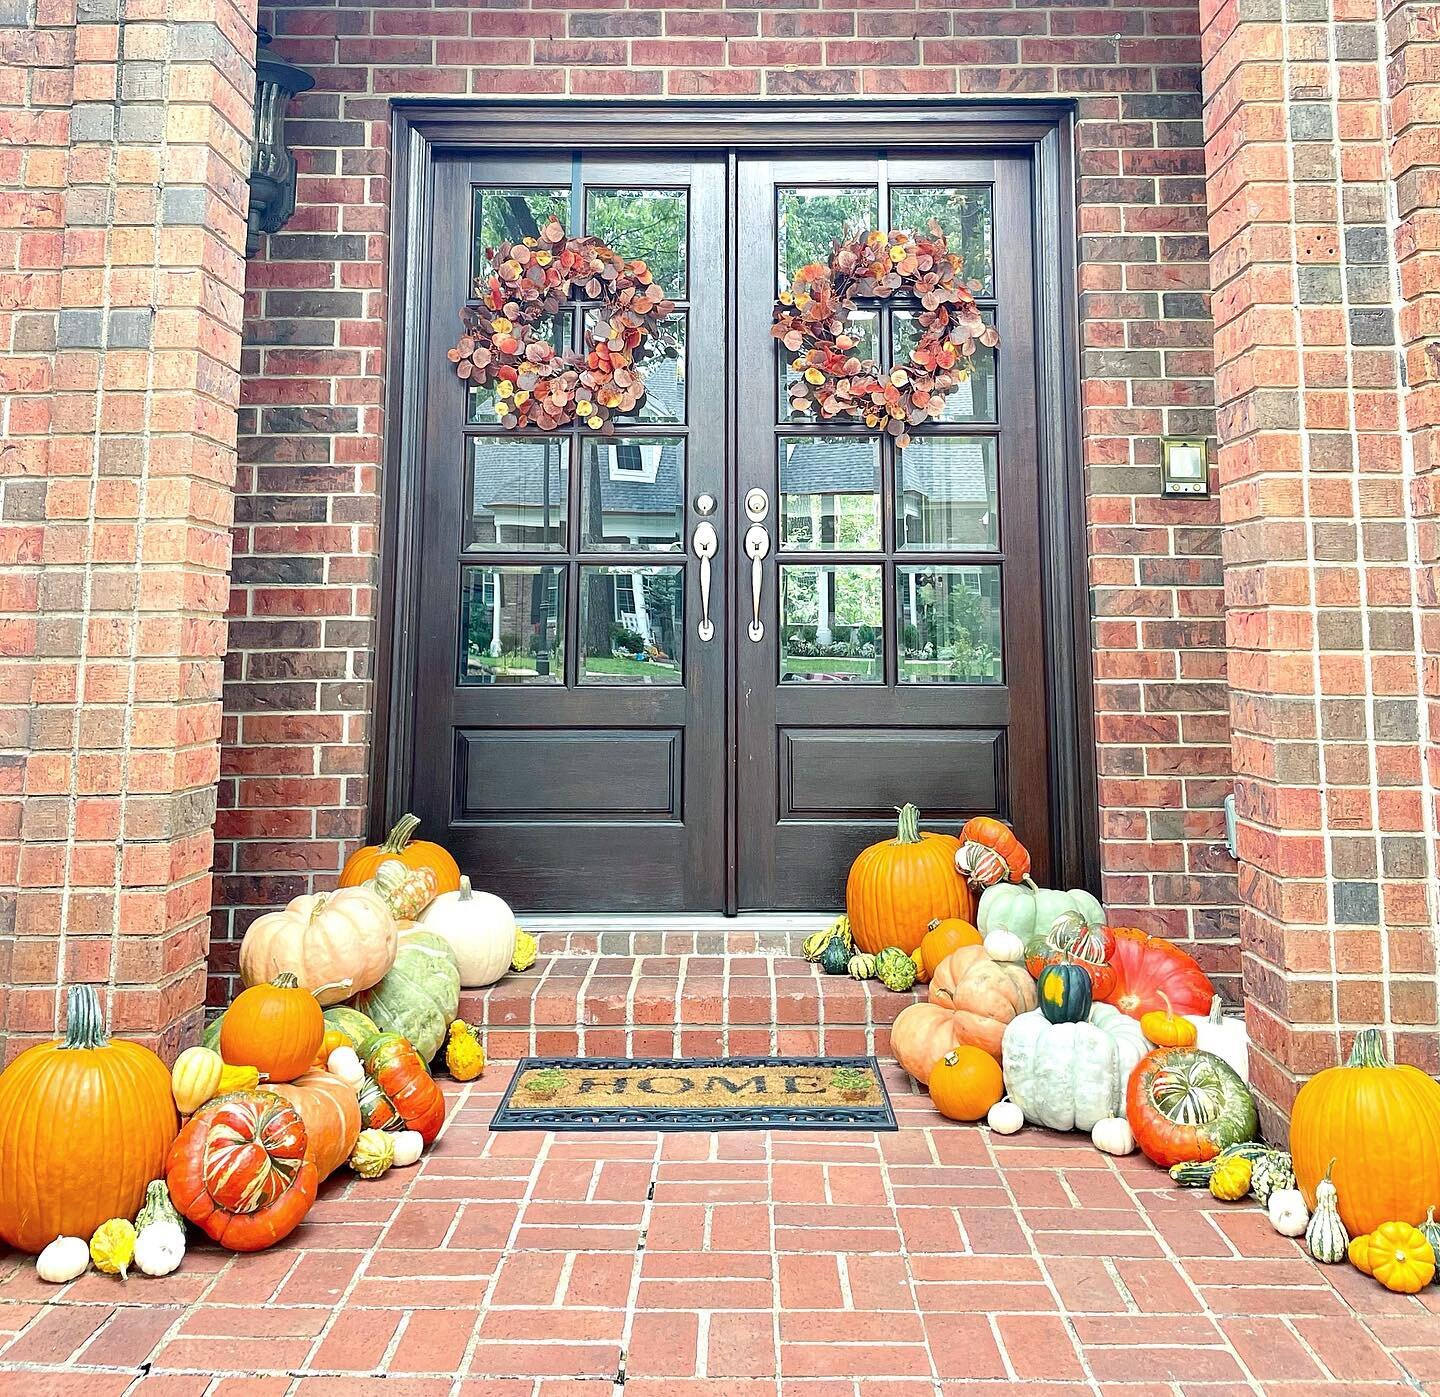 We&rsquo;ve officially launched &ldquo;Hello Pumpkins&rdquo;. A local pumpkin delivery service to get your front porch looking festive for fall. Every time I see my pumpkins out our front door it brings me joy! If you want the pretty look brought to 